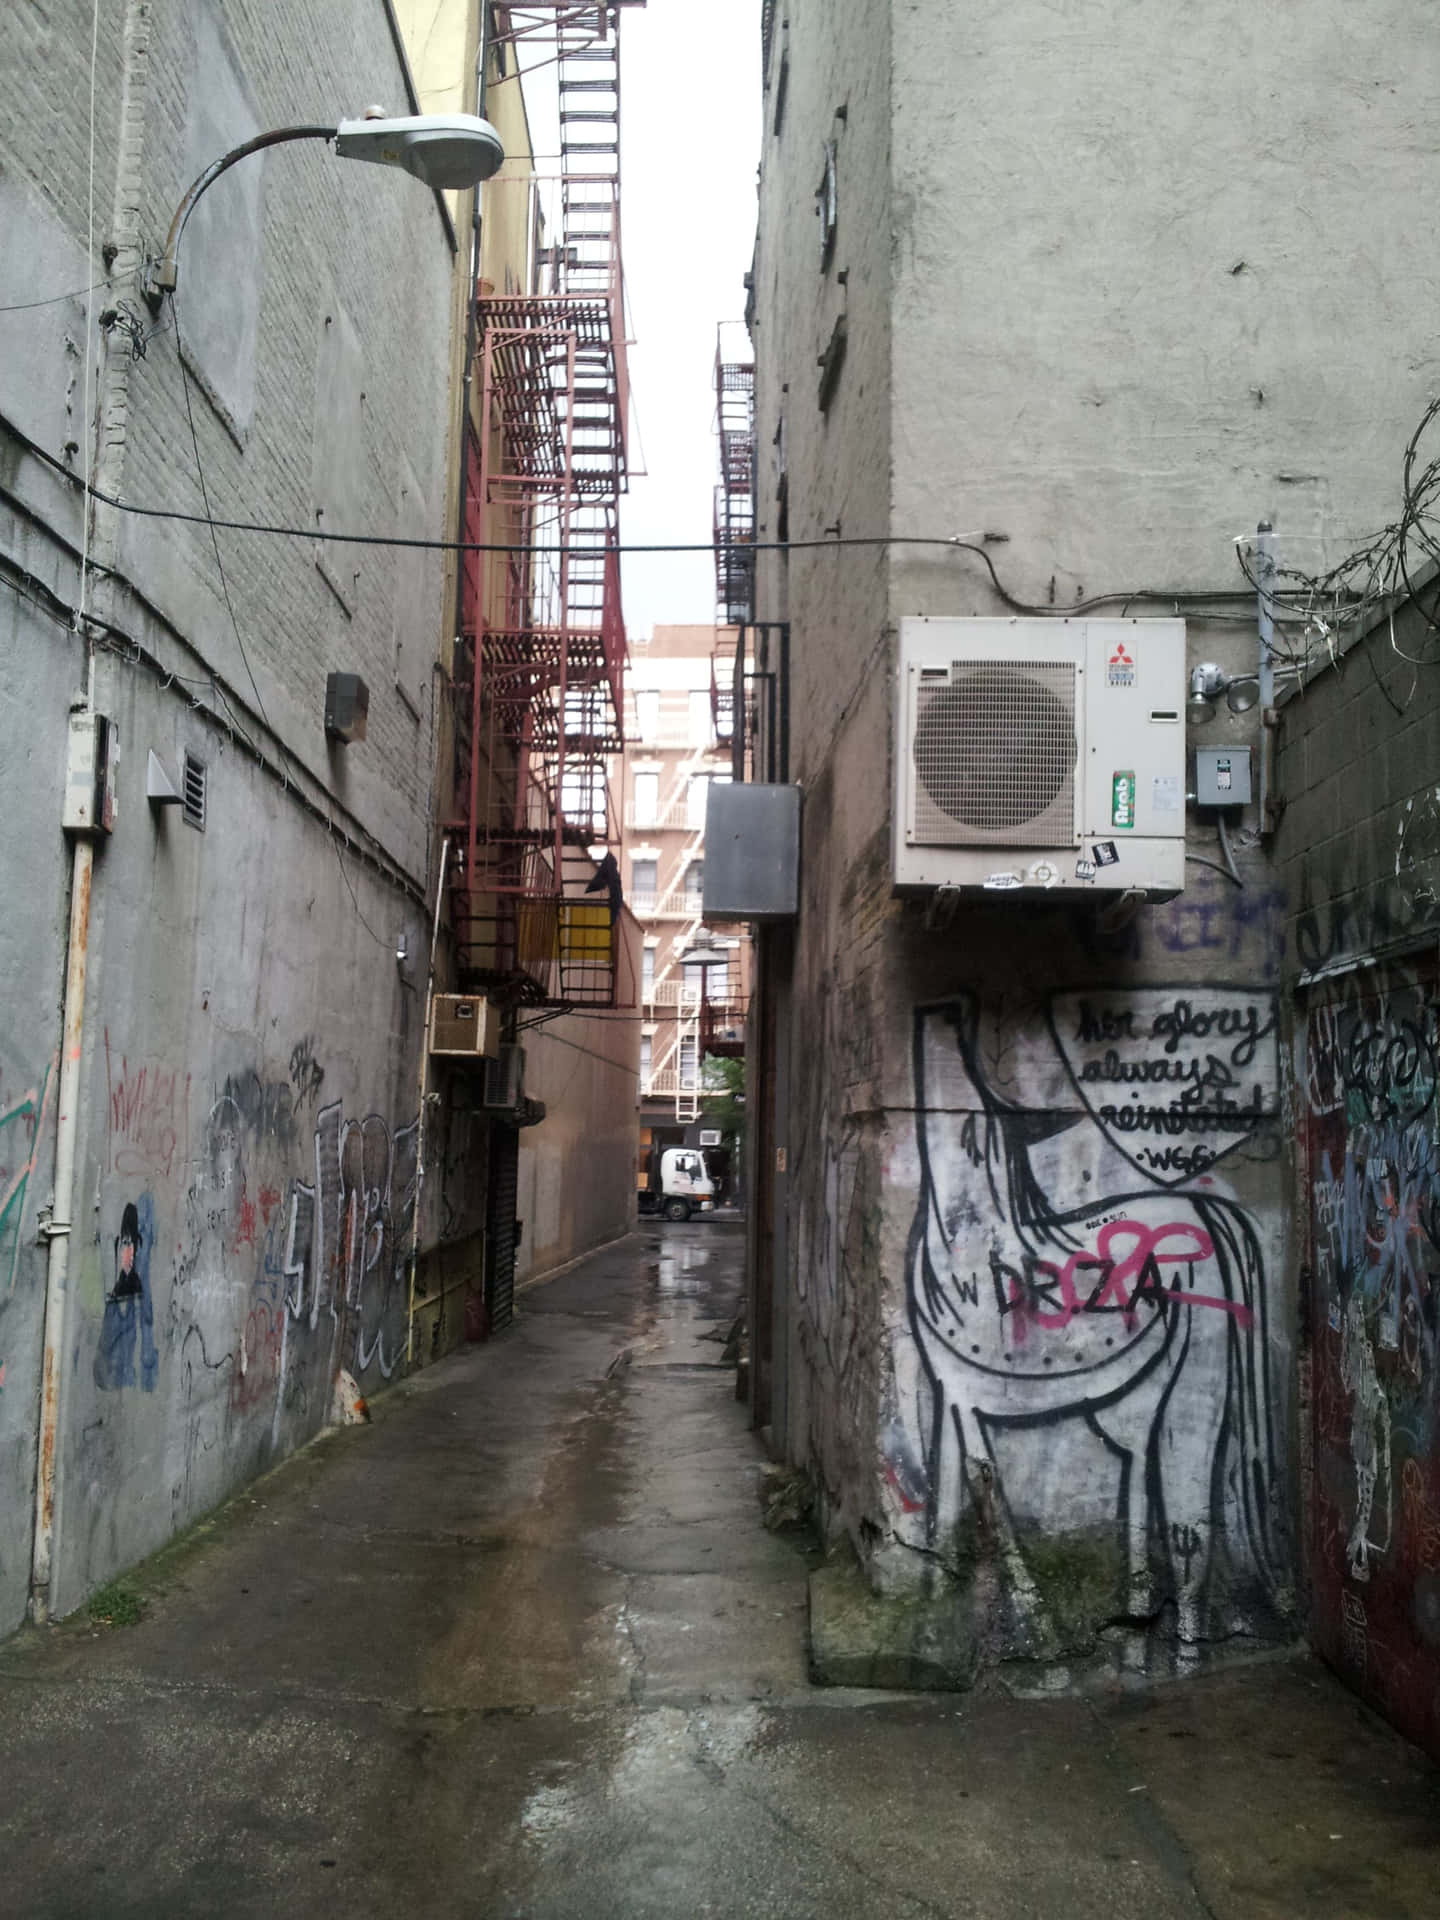 A Look Into An Intimate Alleyway